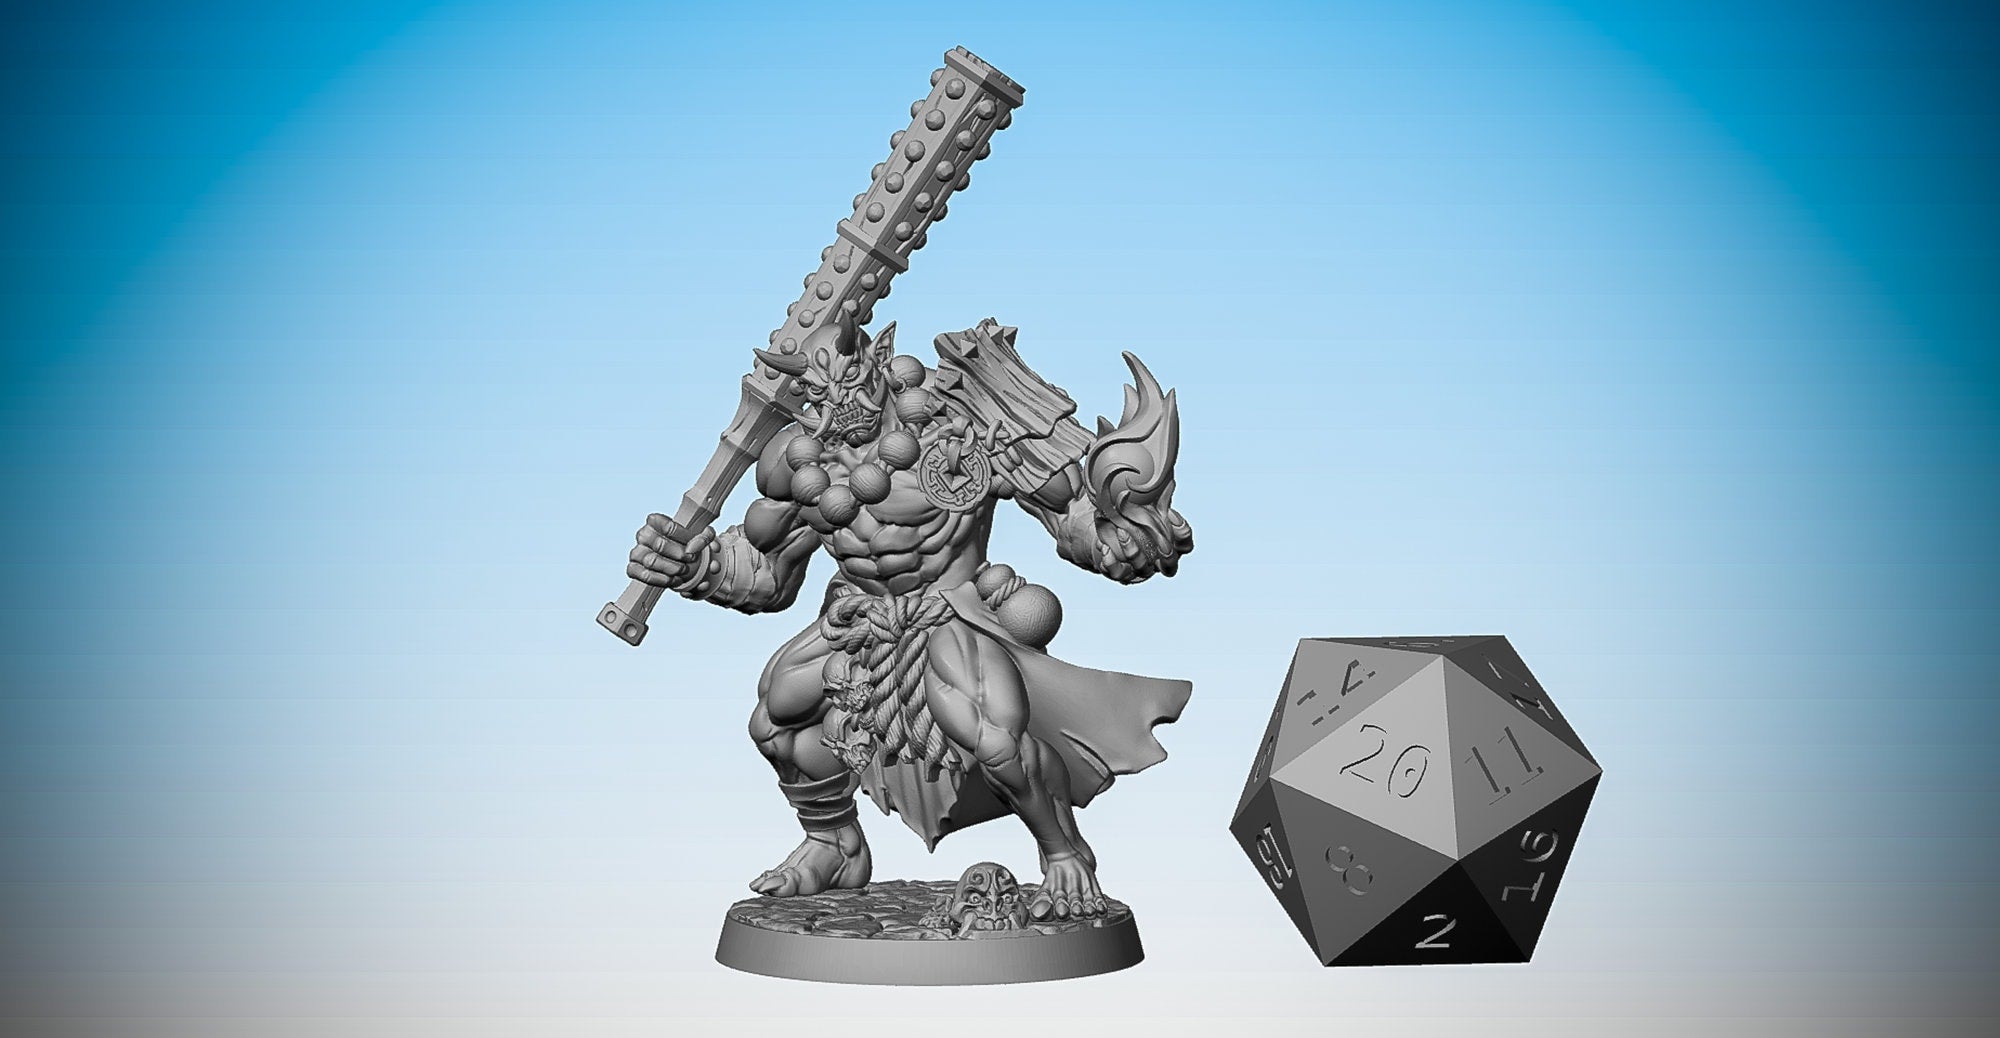 ONI GRUNT "Kanabo & Spell"-Role Playing Miniatures